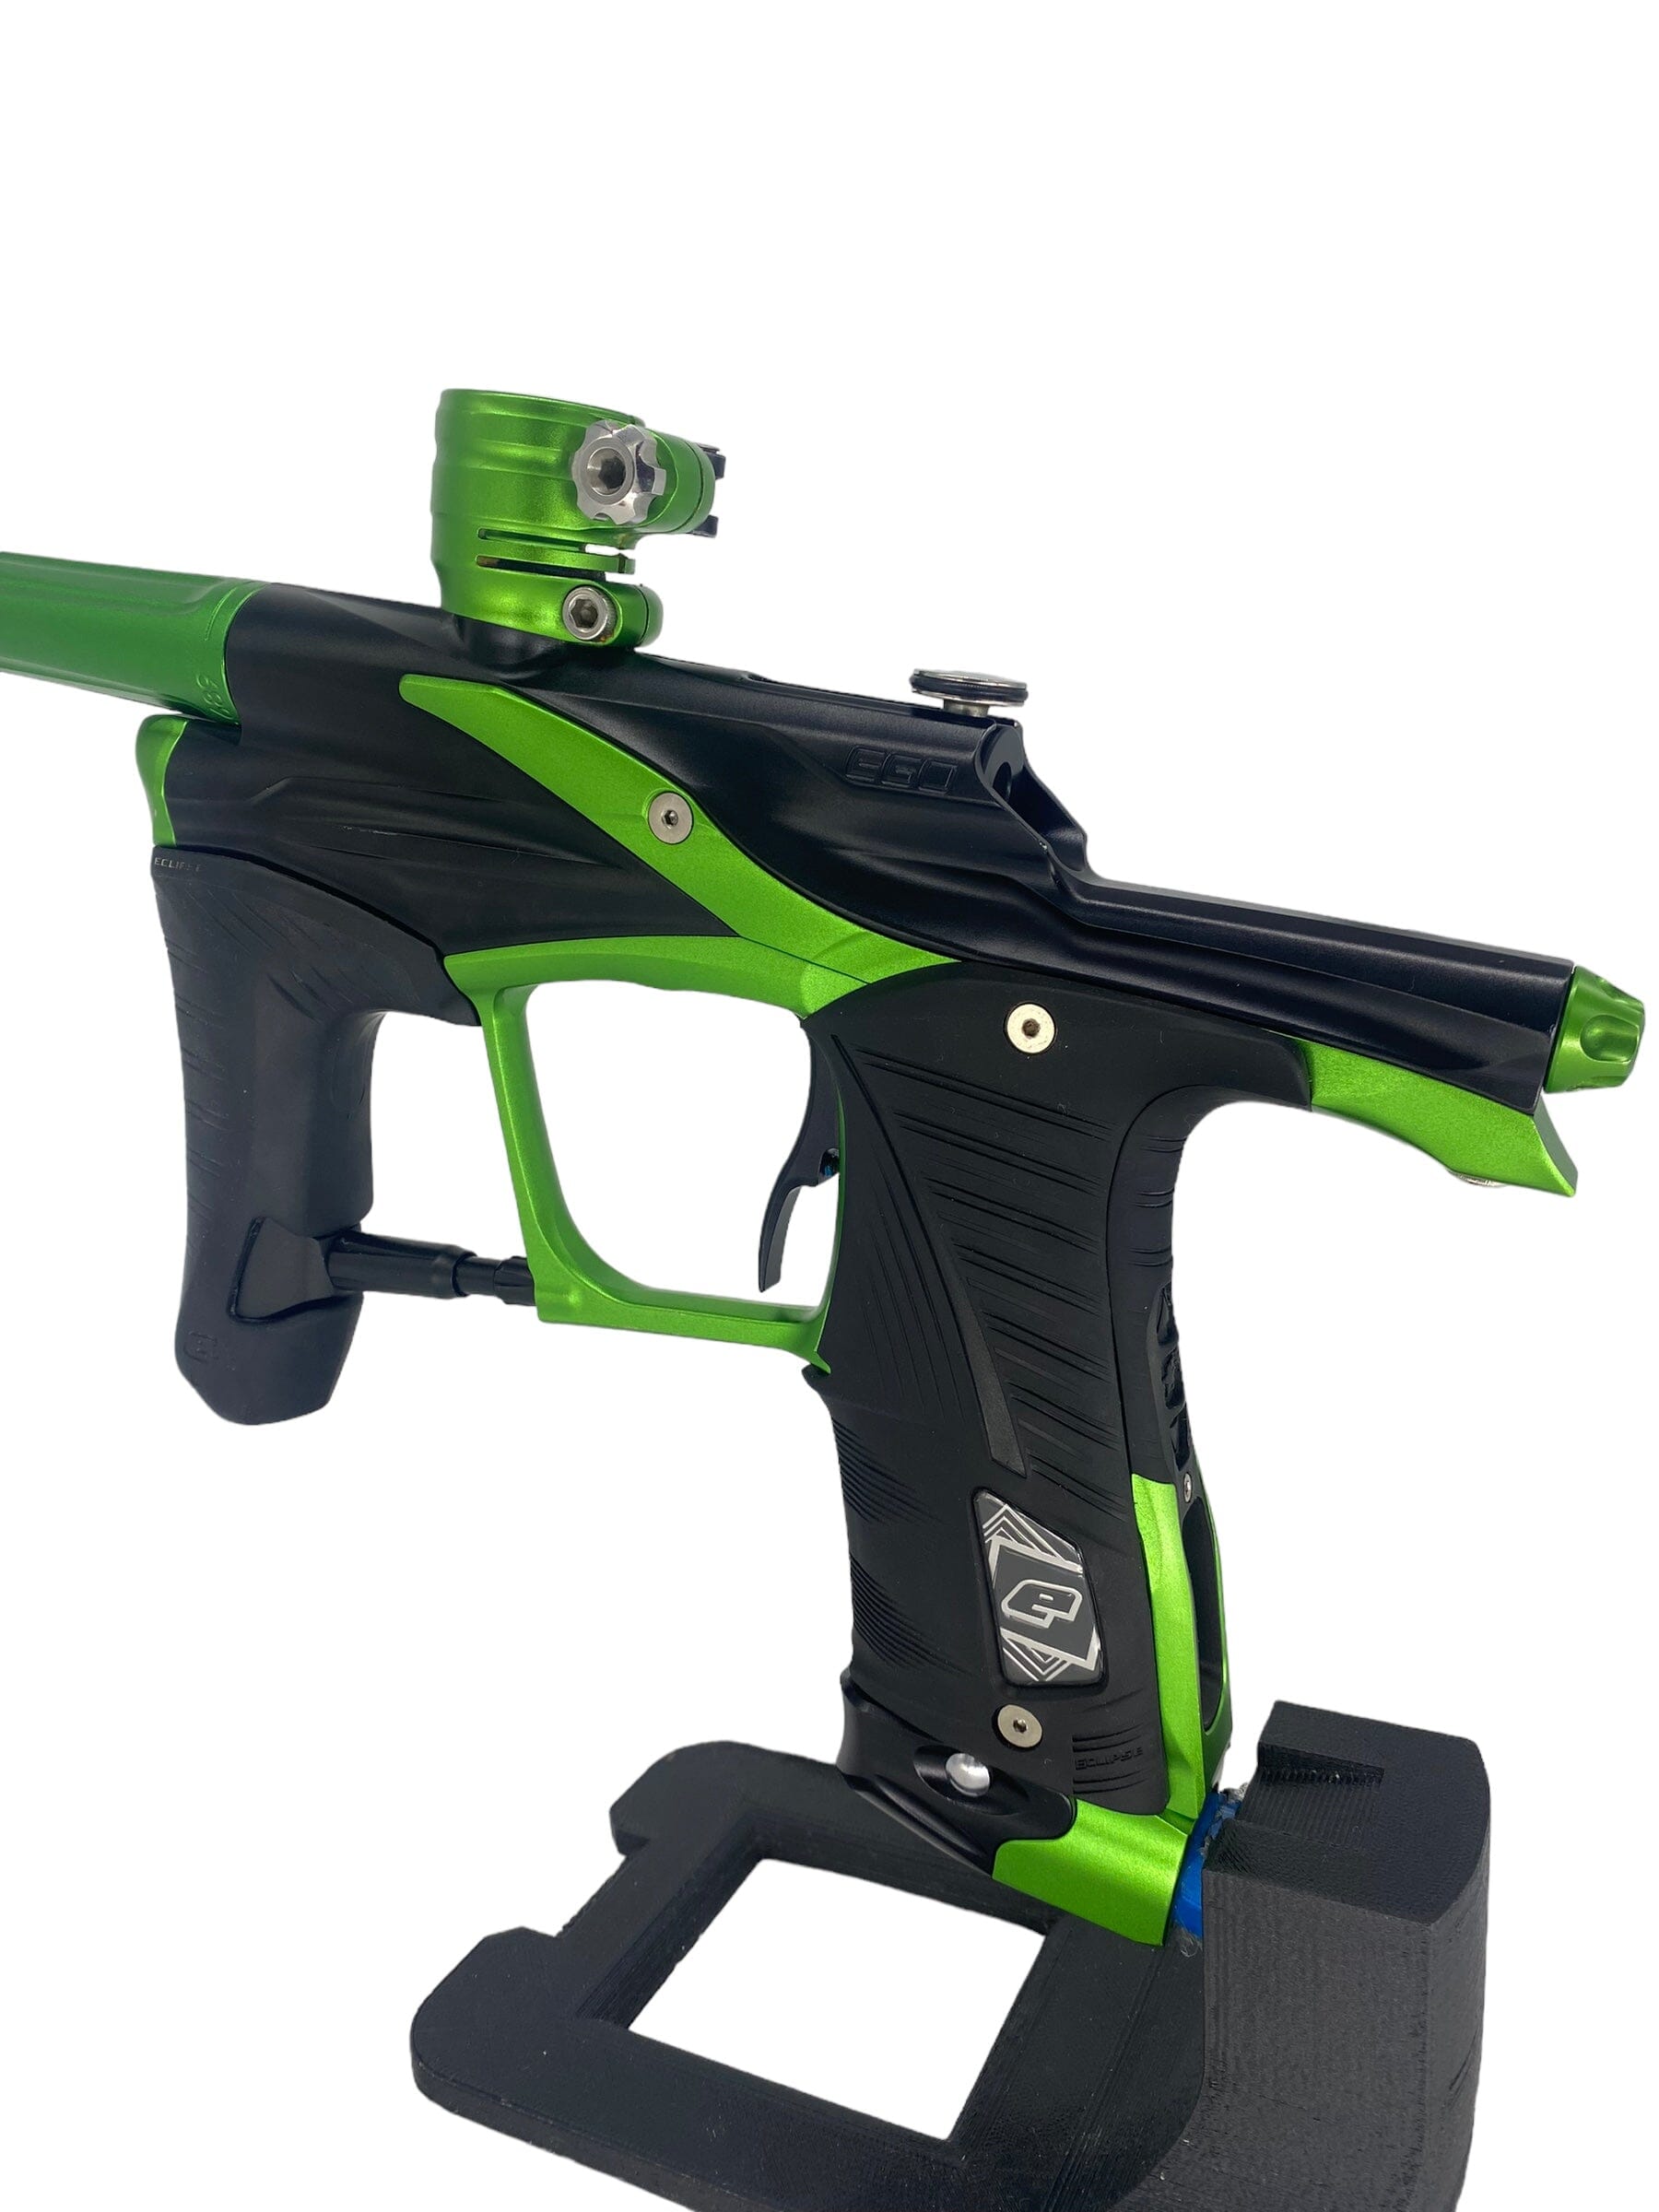 Used Planet Eclipse Lv1.1 Paintball Gun Paintball Gun from CPXBrosPaintball Buy/Sell/Trade Paintball Markers, Paintball Hoppers, Paintball Masks, and Hormesis Headbands